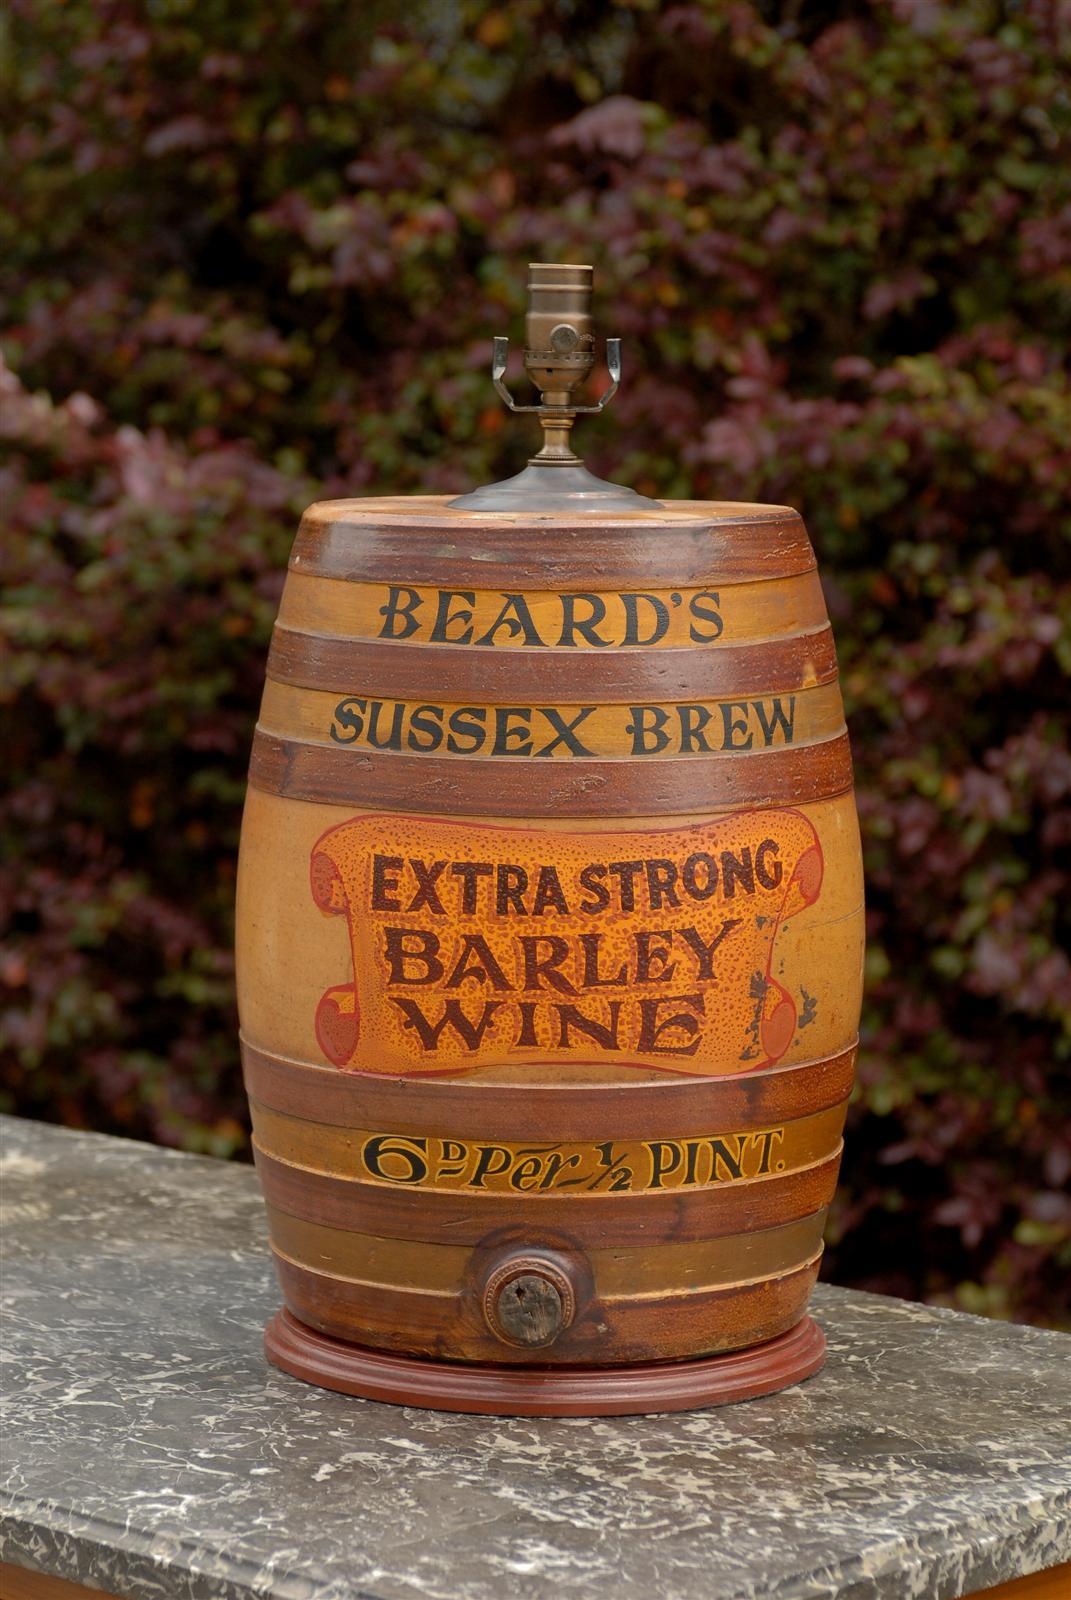 This large stoneware spirit barrel from the late 19th century has been transformed into a beautiful table lamp. The lamp is made of a lighter brown circled by six faux darker brown straps. The barrel features the name Beard’s Sussex Brew. The